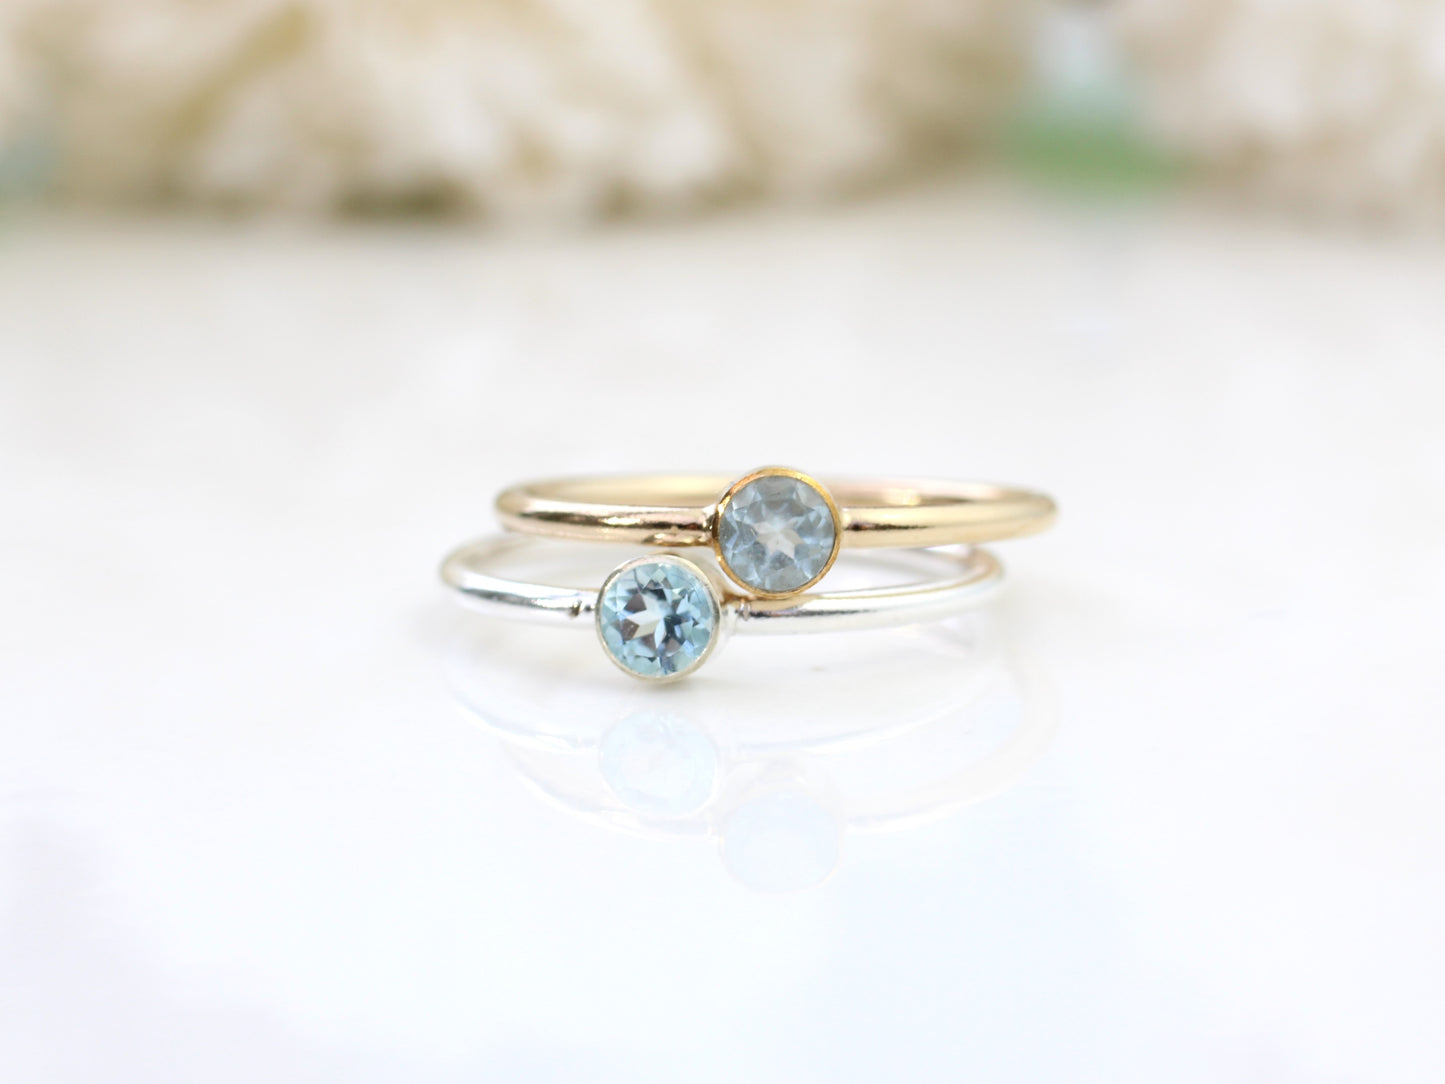 Aquamarine ring in silver or gold. March birthstone ring.